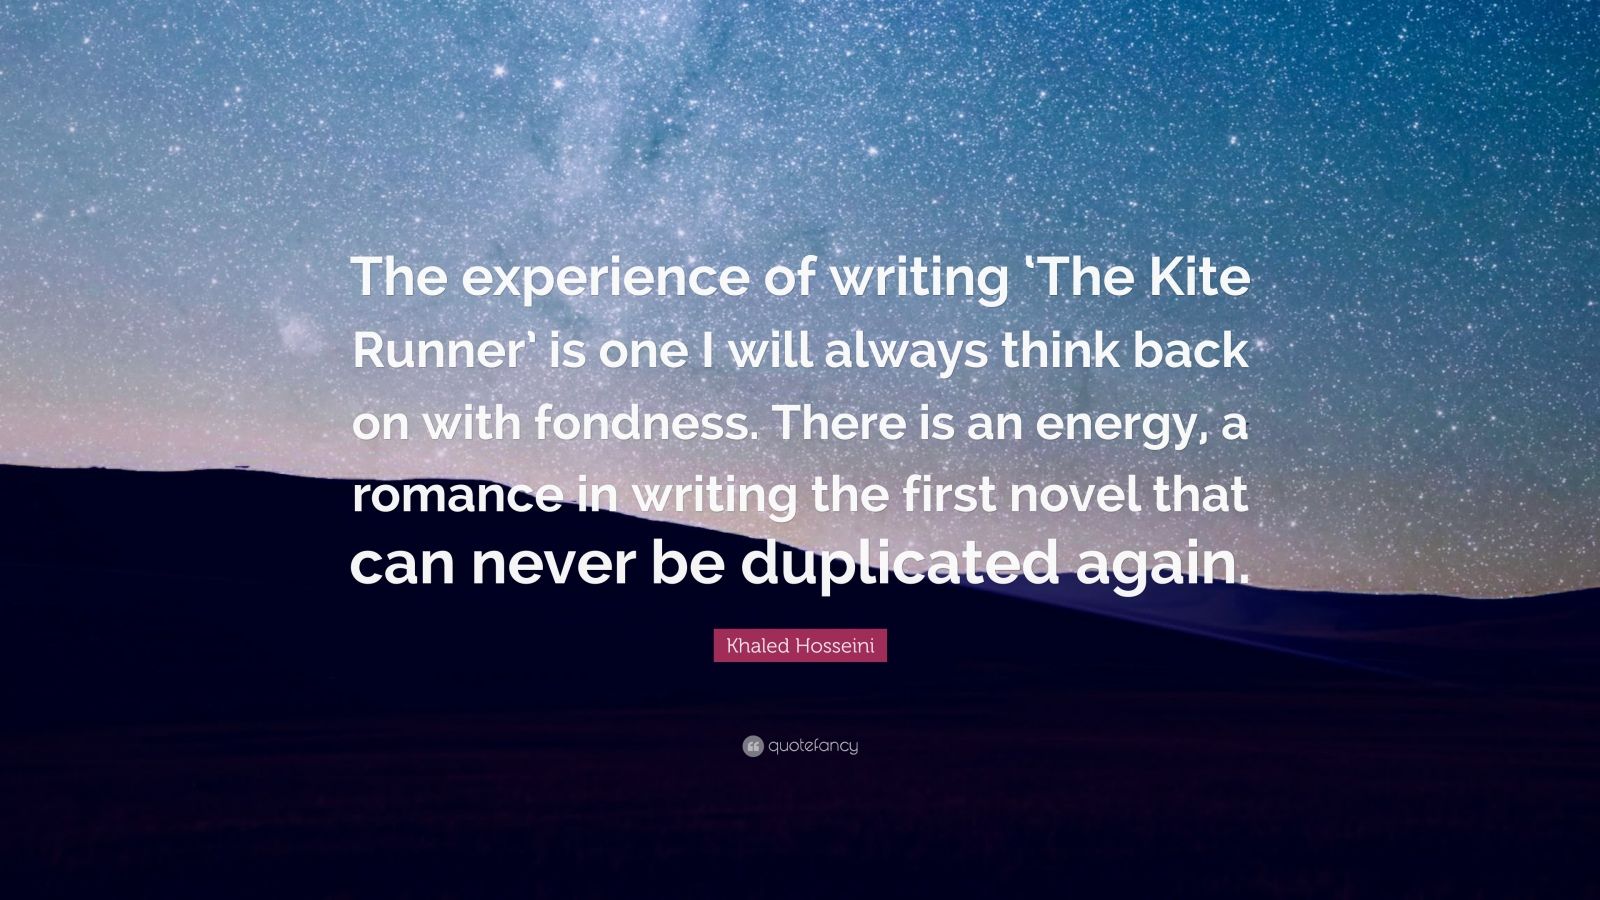 Khaled Hosseini Quote: “The experience of writing 'The Kite Runner' is one I will always think back on with fondness. There is an energy, a roma.”